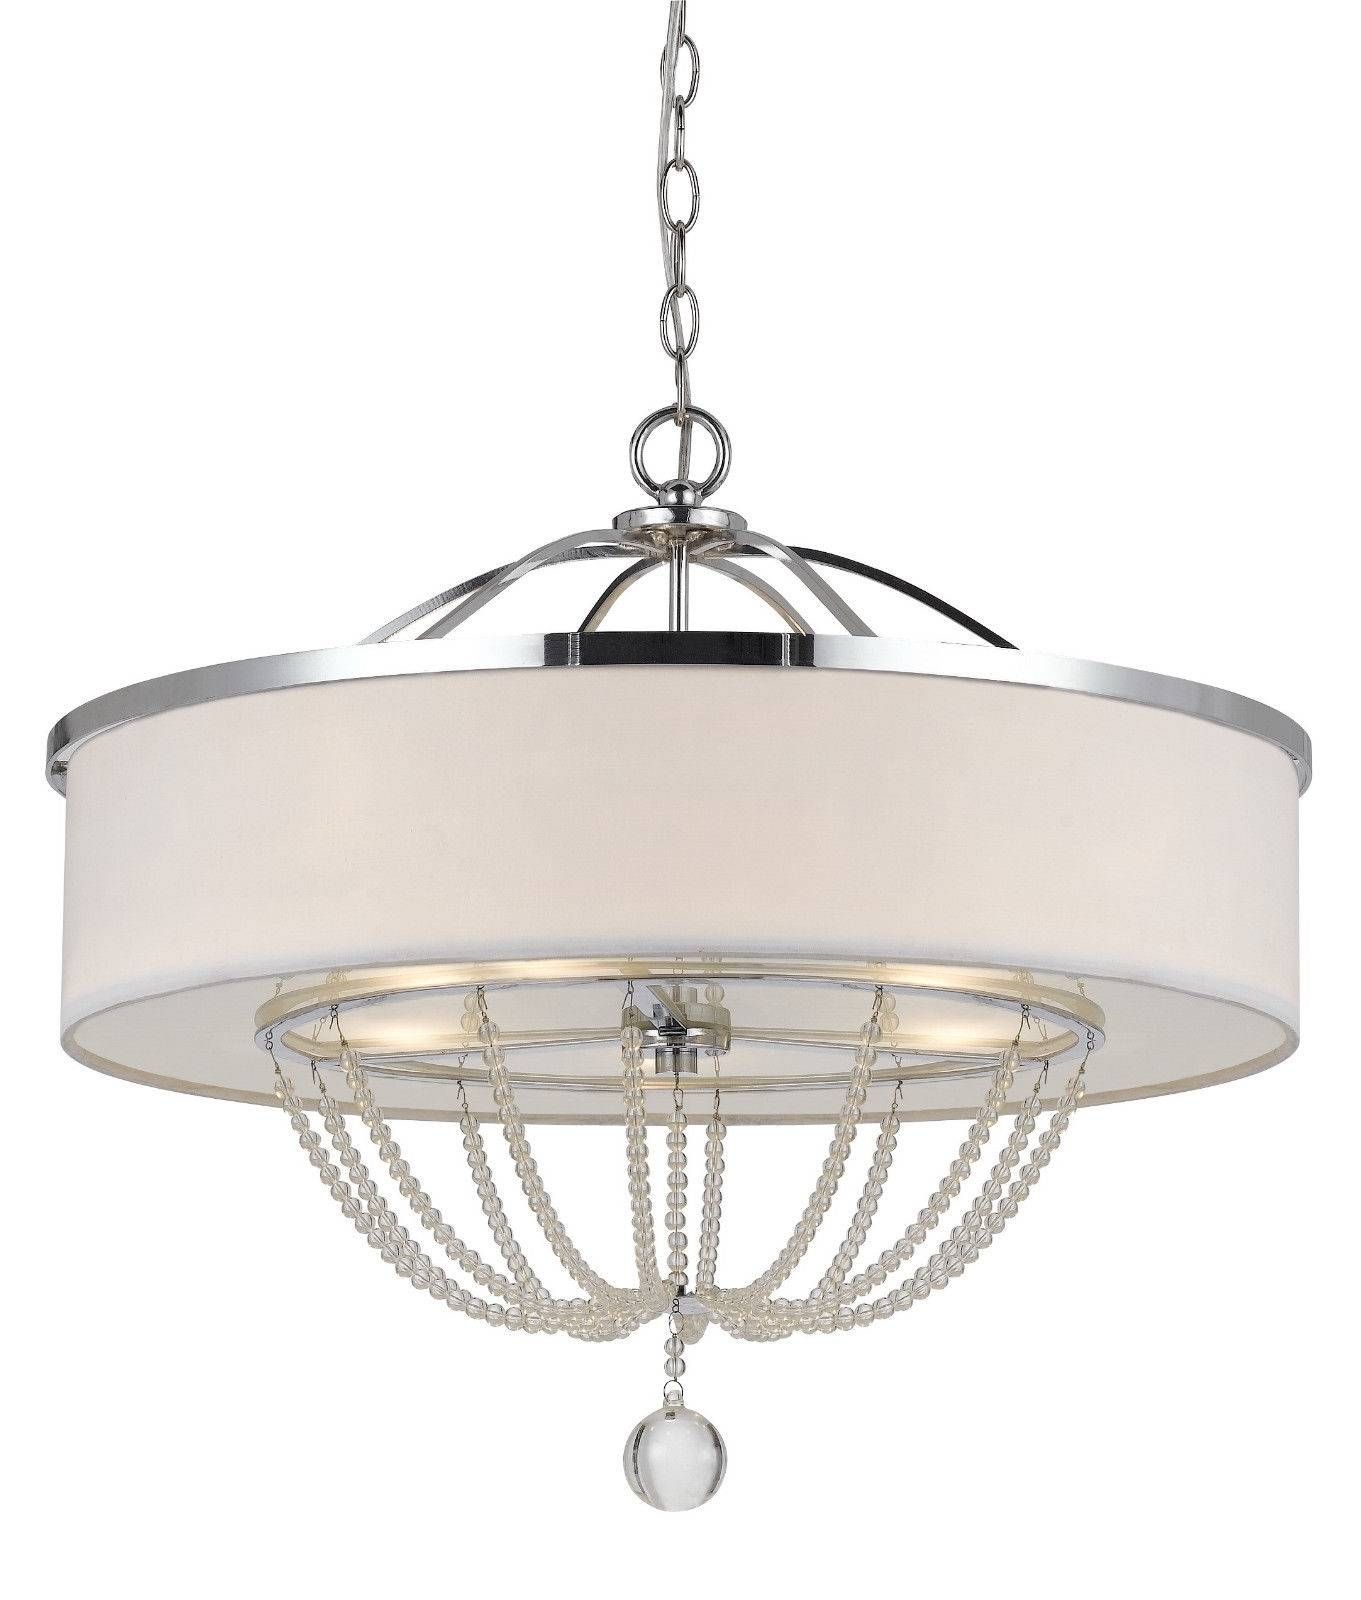 White Modern Chandelier | Chandelier Models Throughout White Drum Lights Fixtures (View 7 of 15)